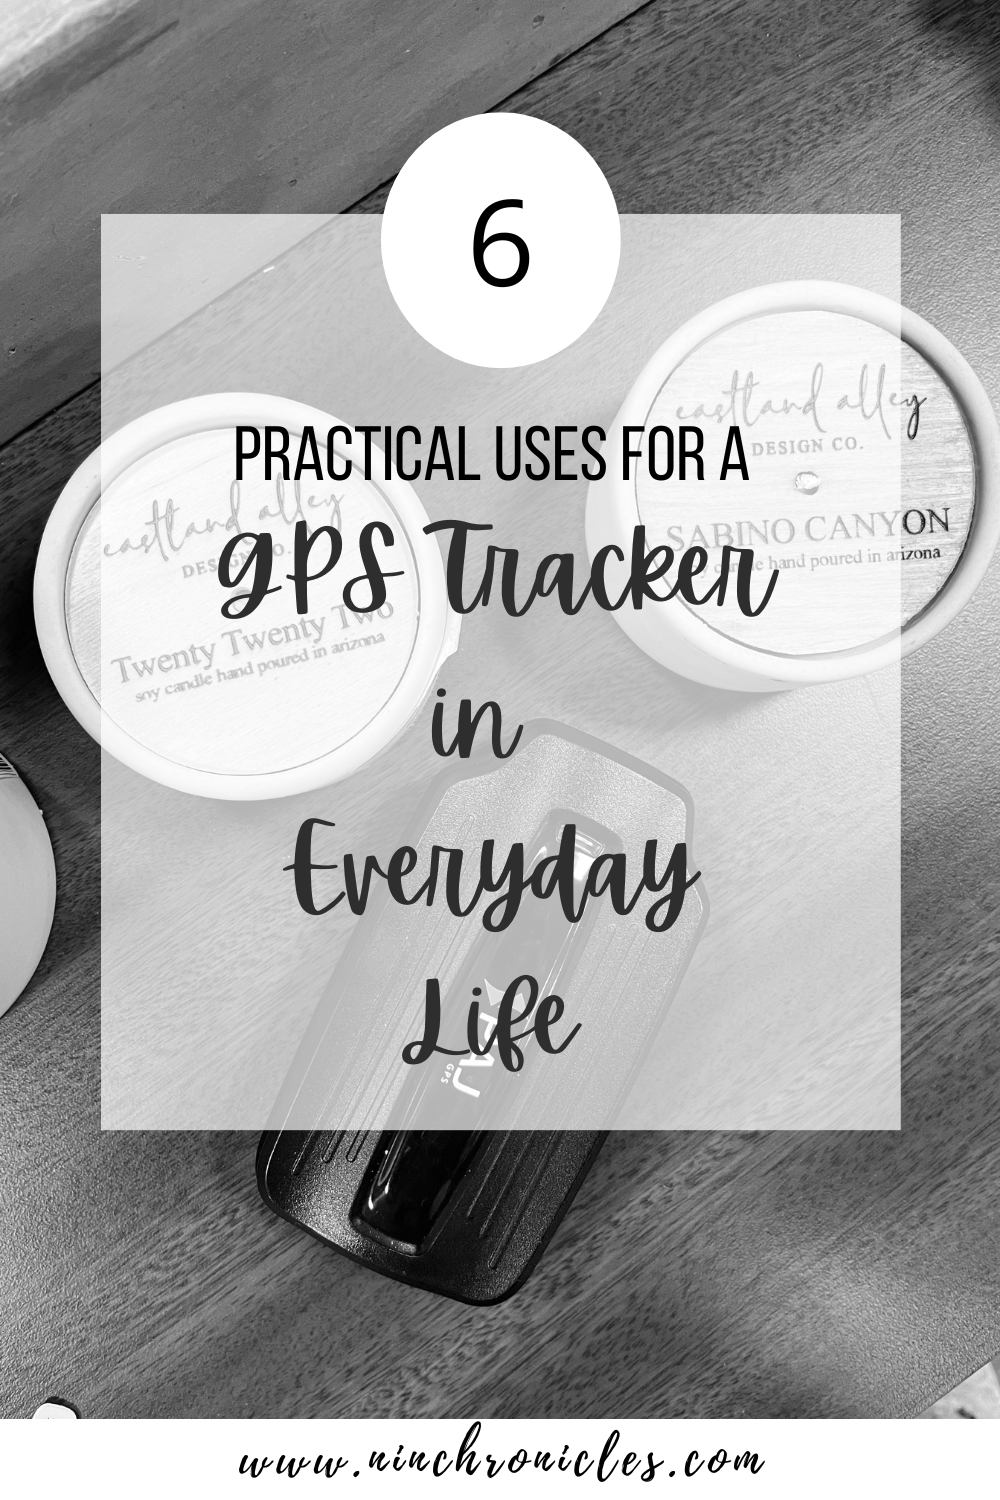 8 places in a car where you can put GPS tracking Device - PAJ GPS